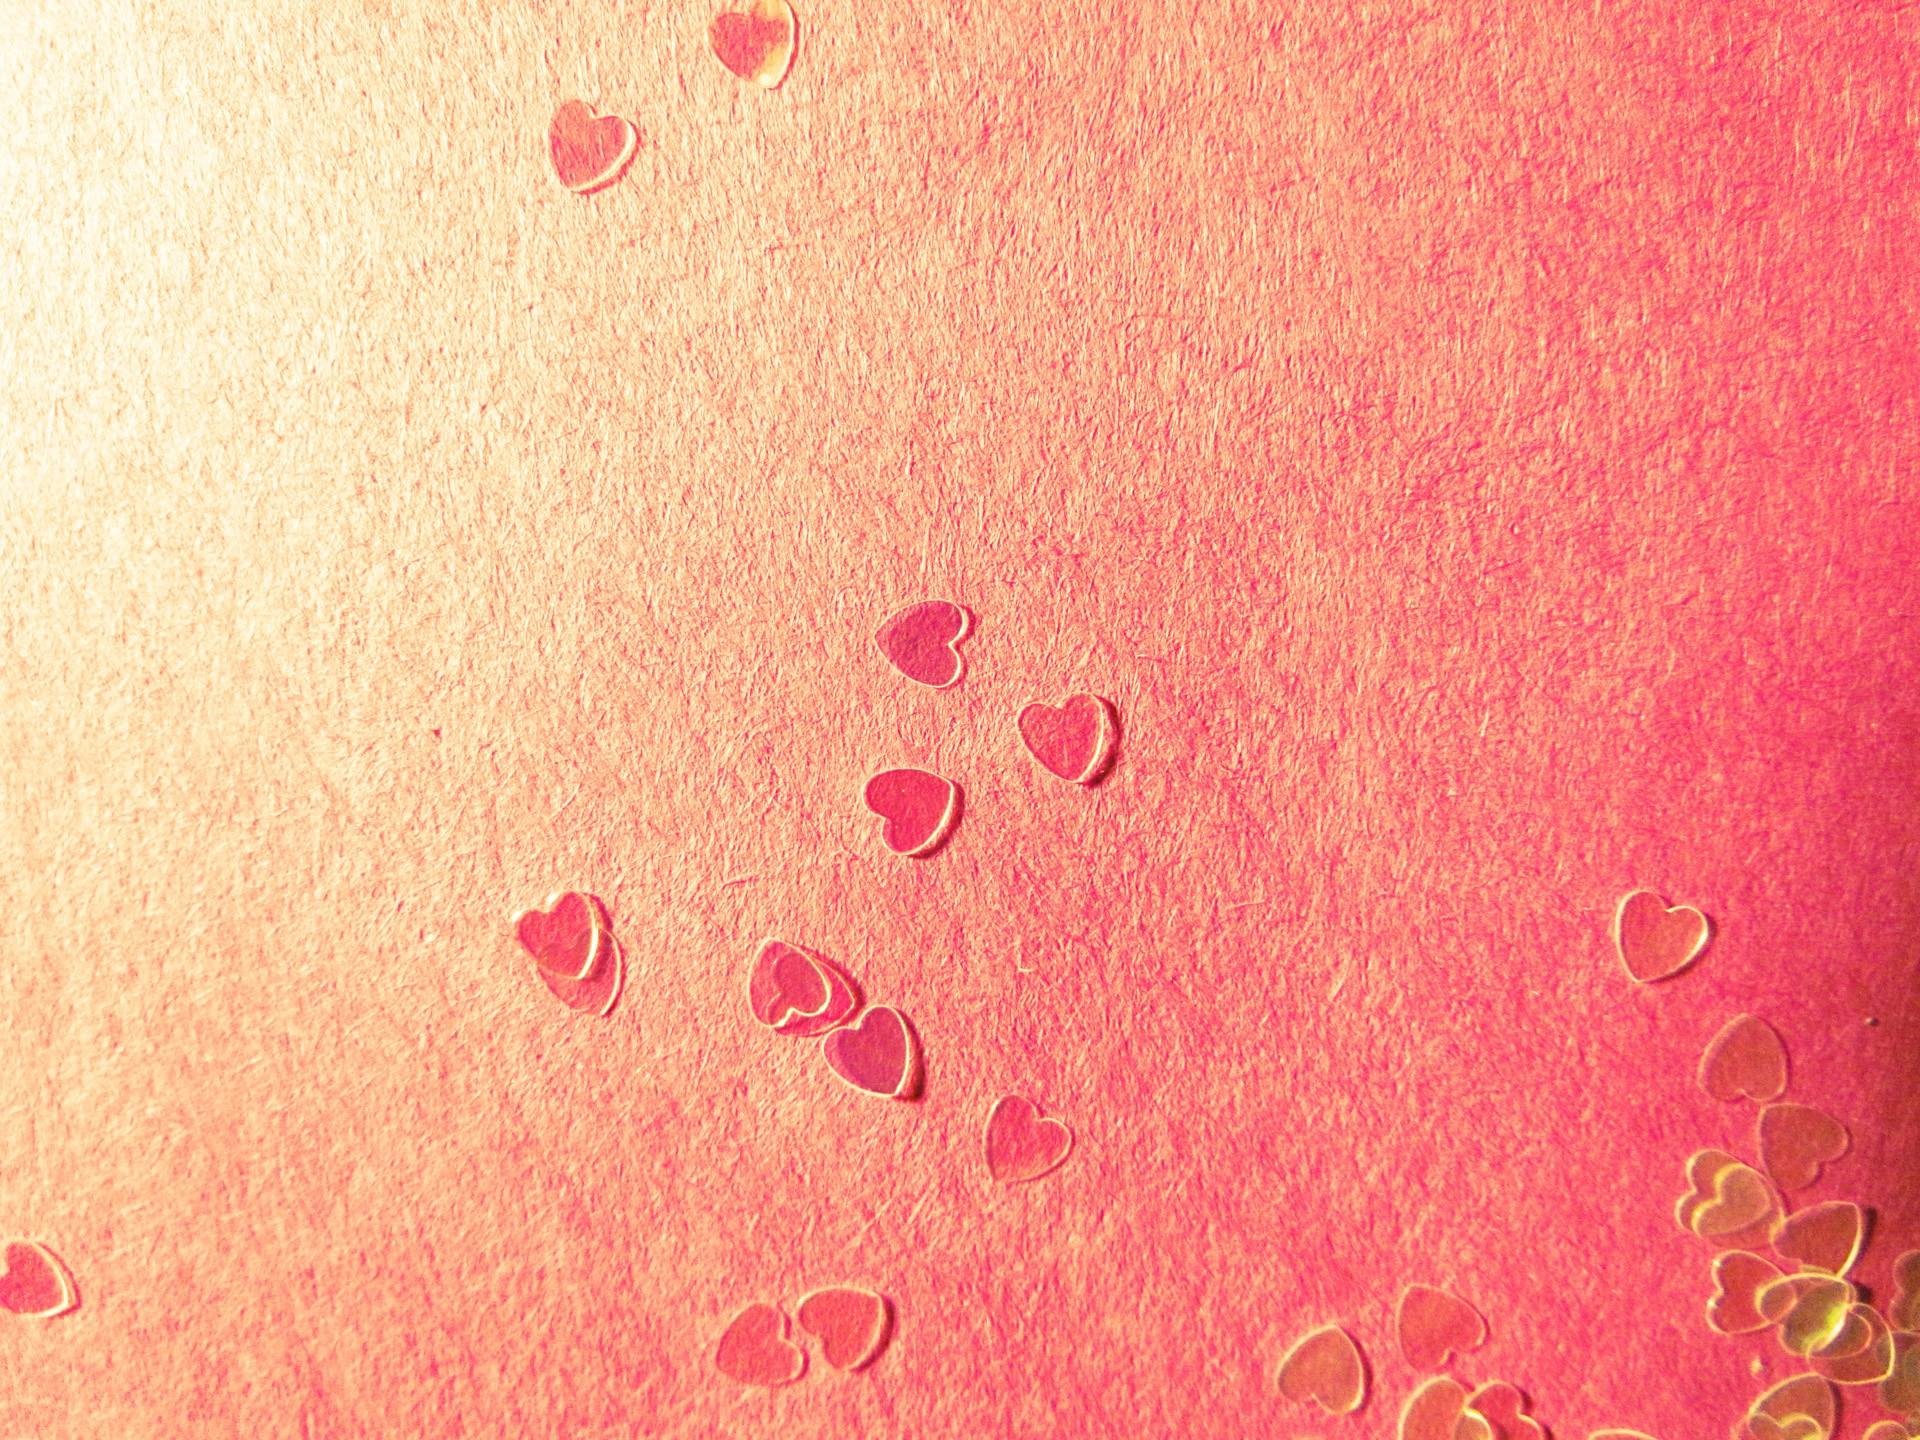 Love Backgrounds 18168 1600x900 Px 1920x1440